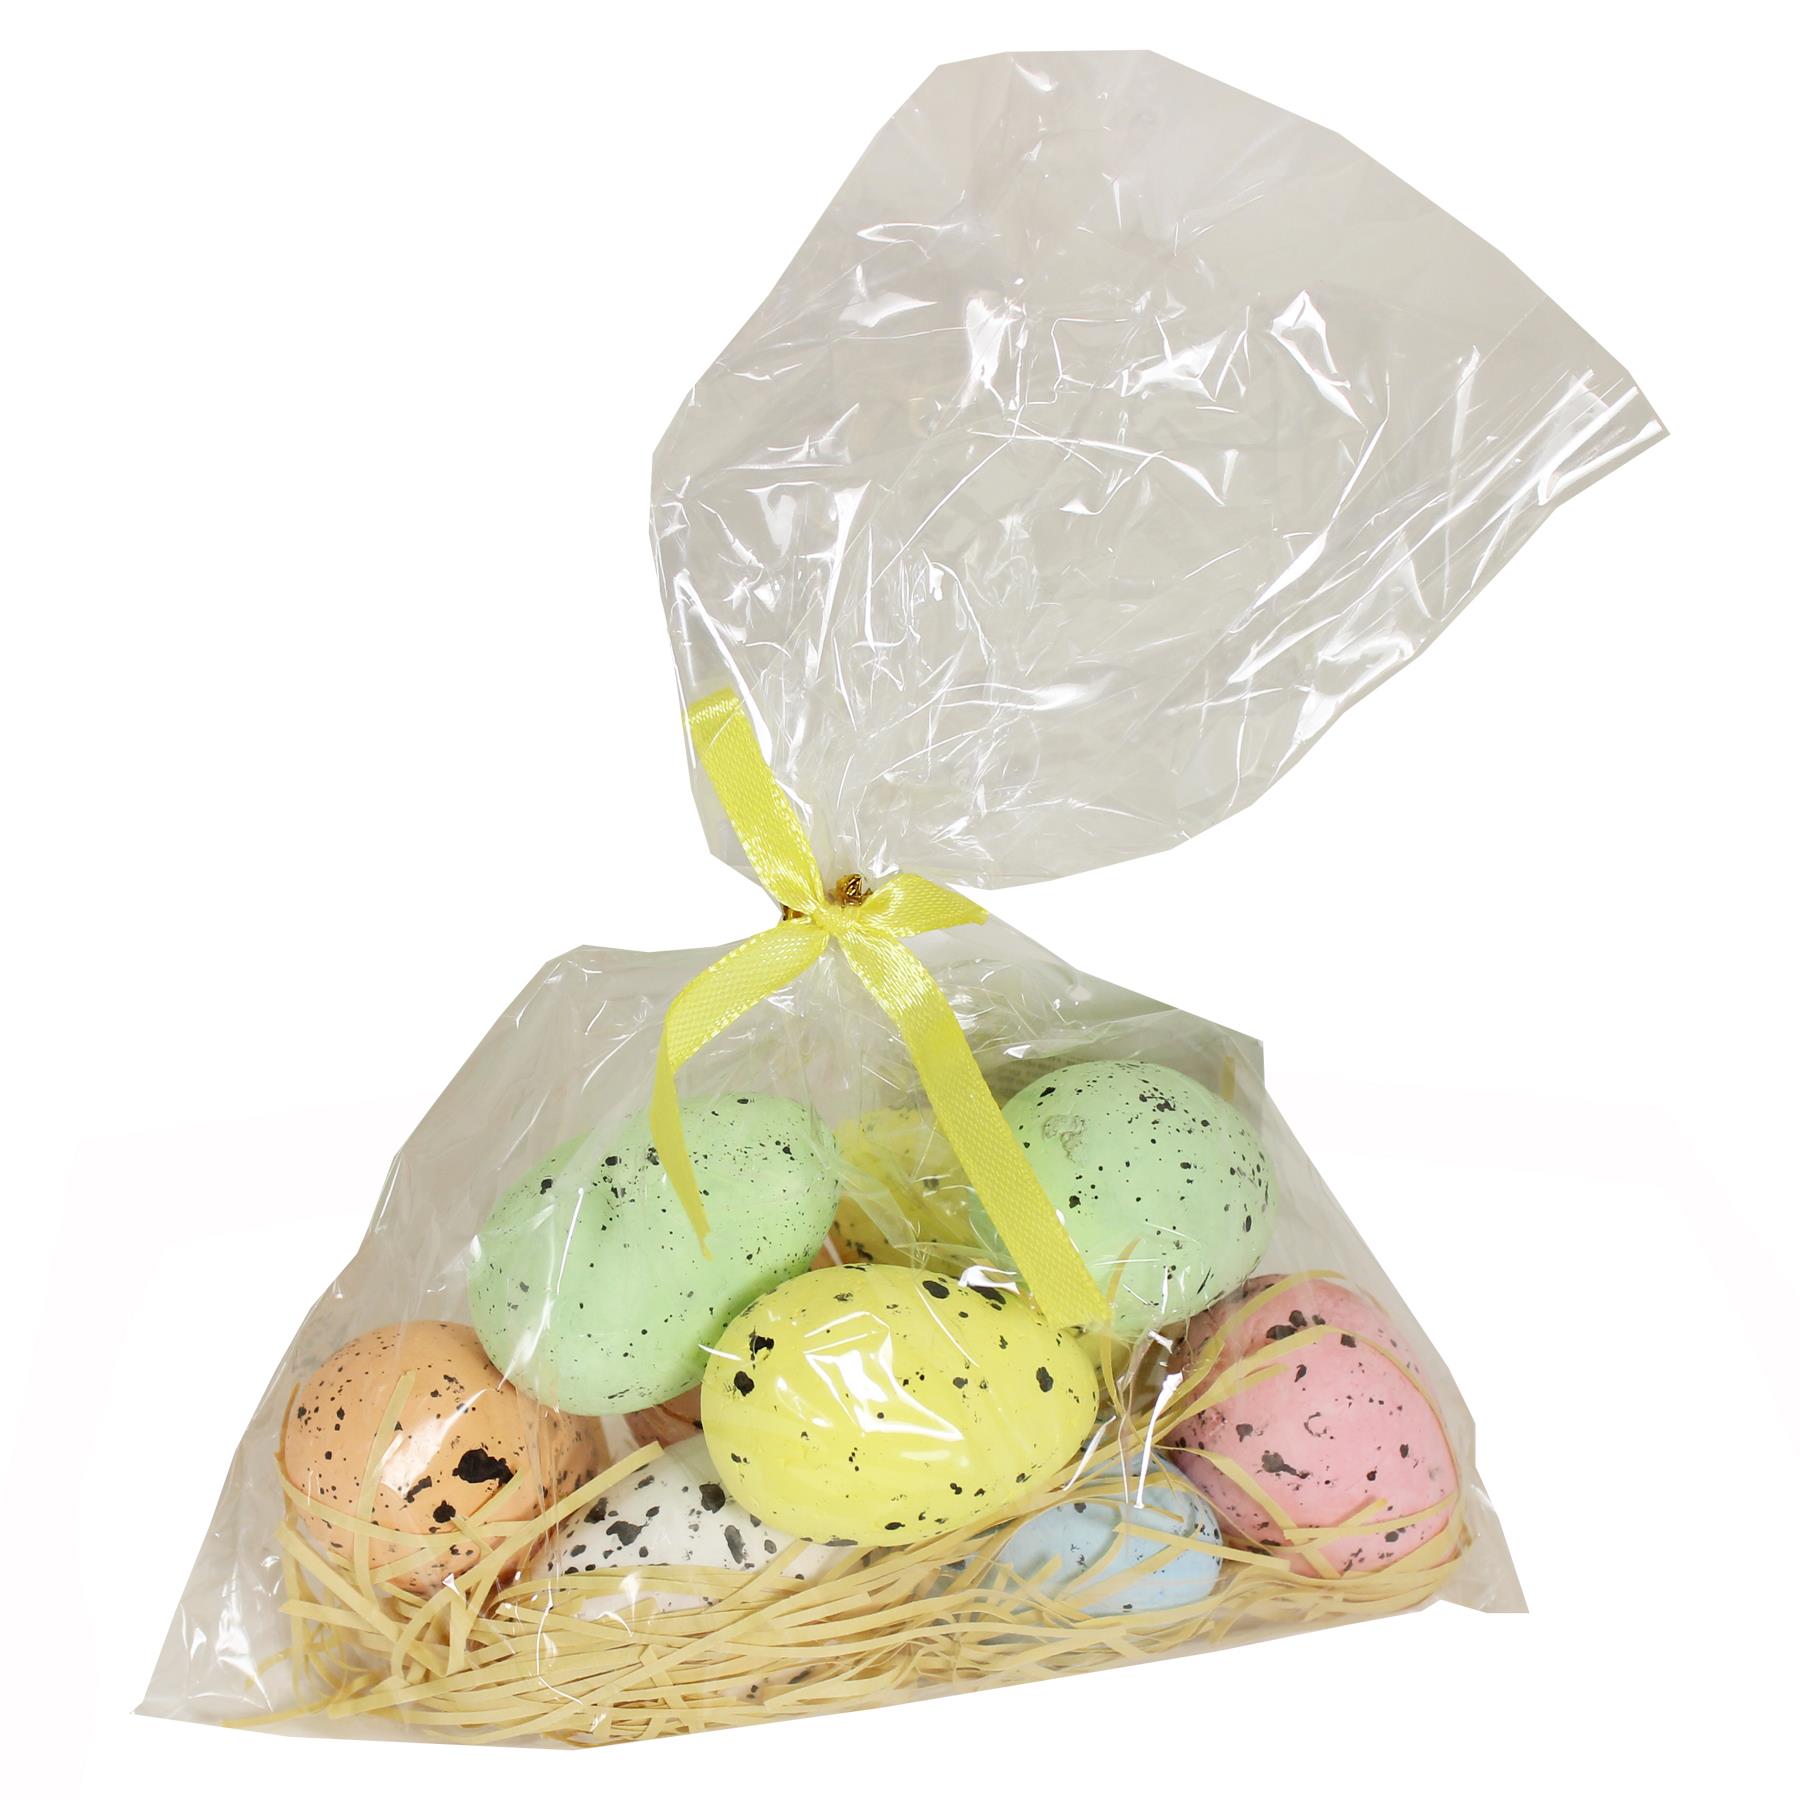 Easter Decorations, Bonnet Arts and Crafts, Egg Hunt - 9 Speckled Eggs with Grass